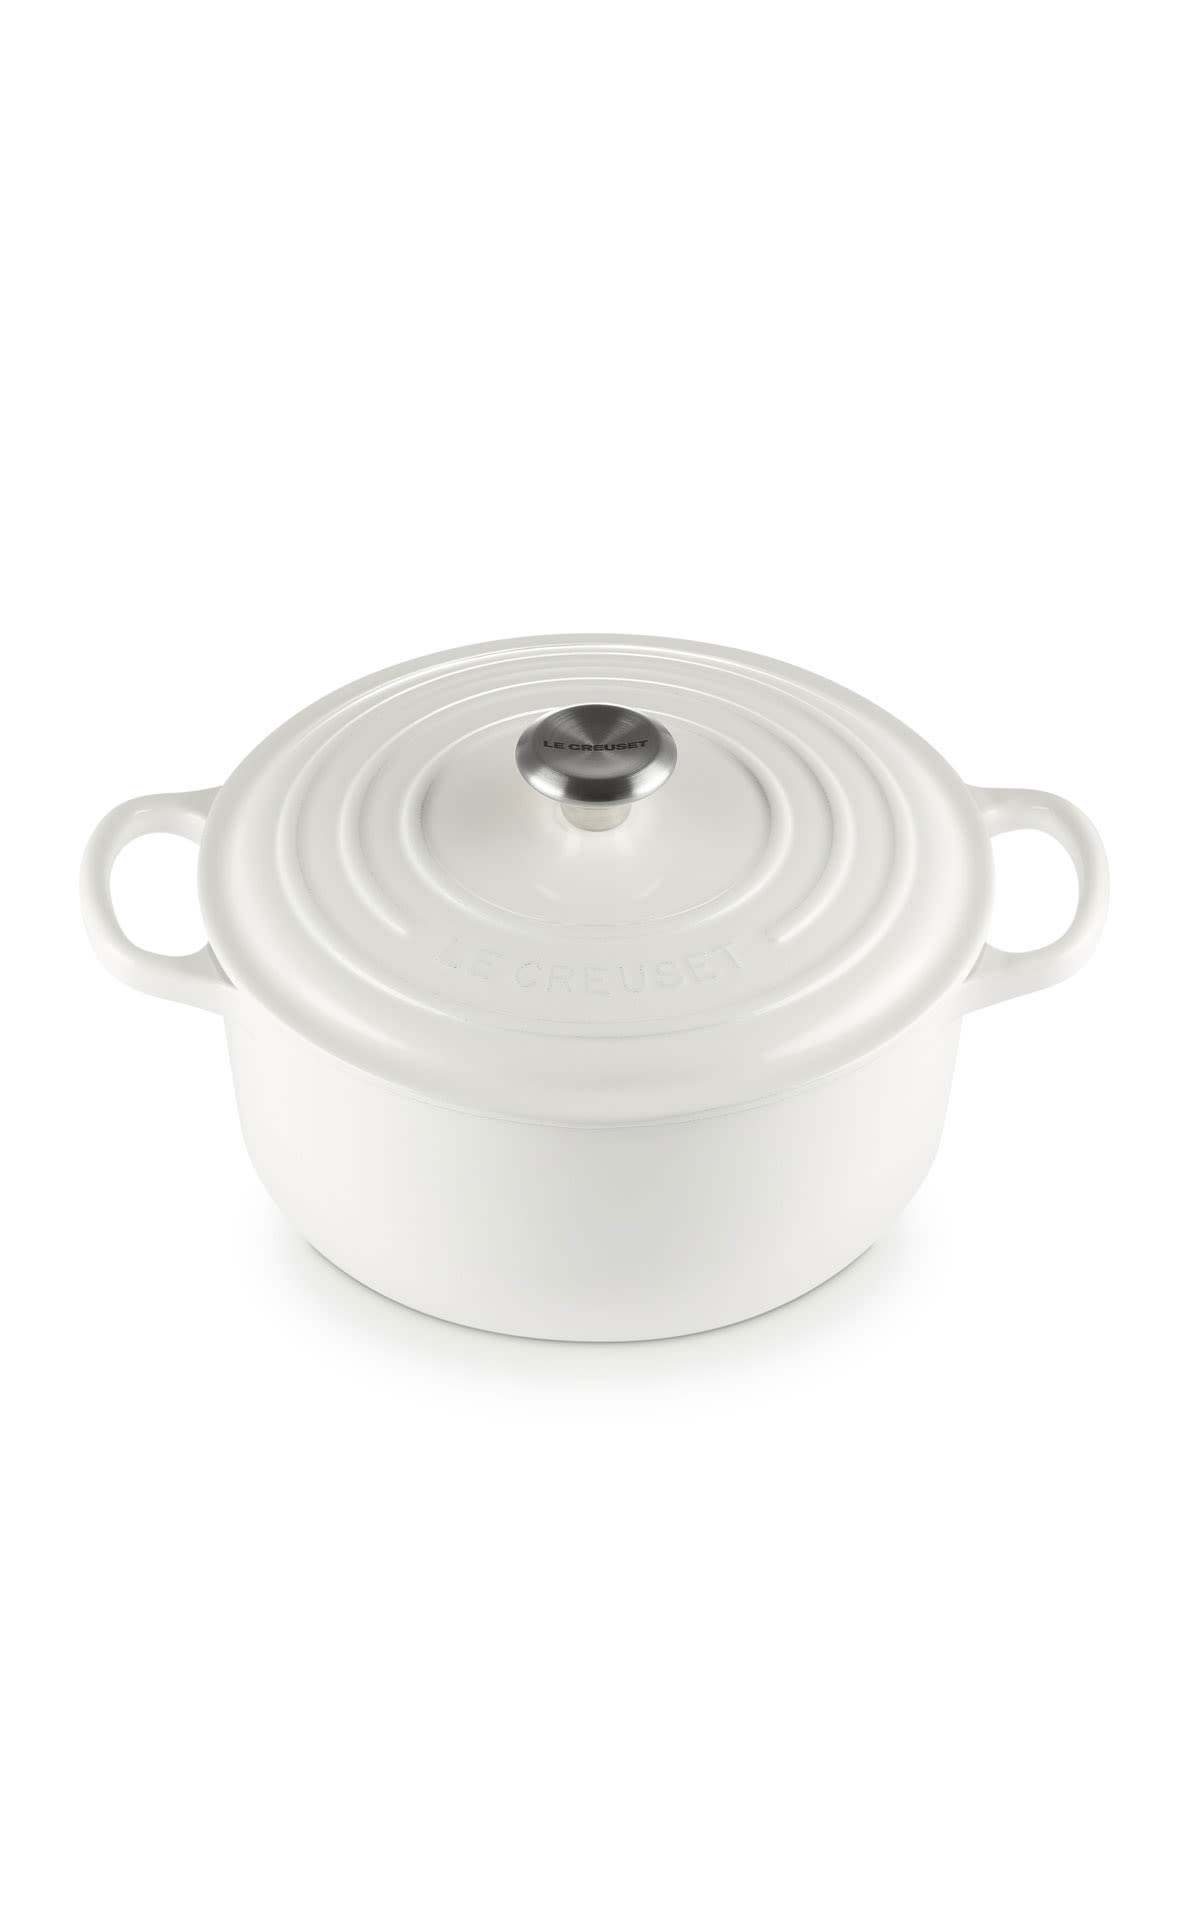 Le Creuset 22cm round casserole white from Bicester Village